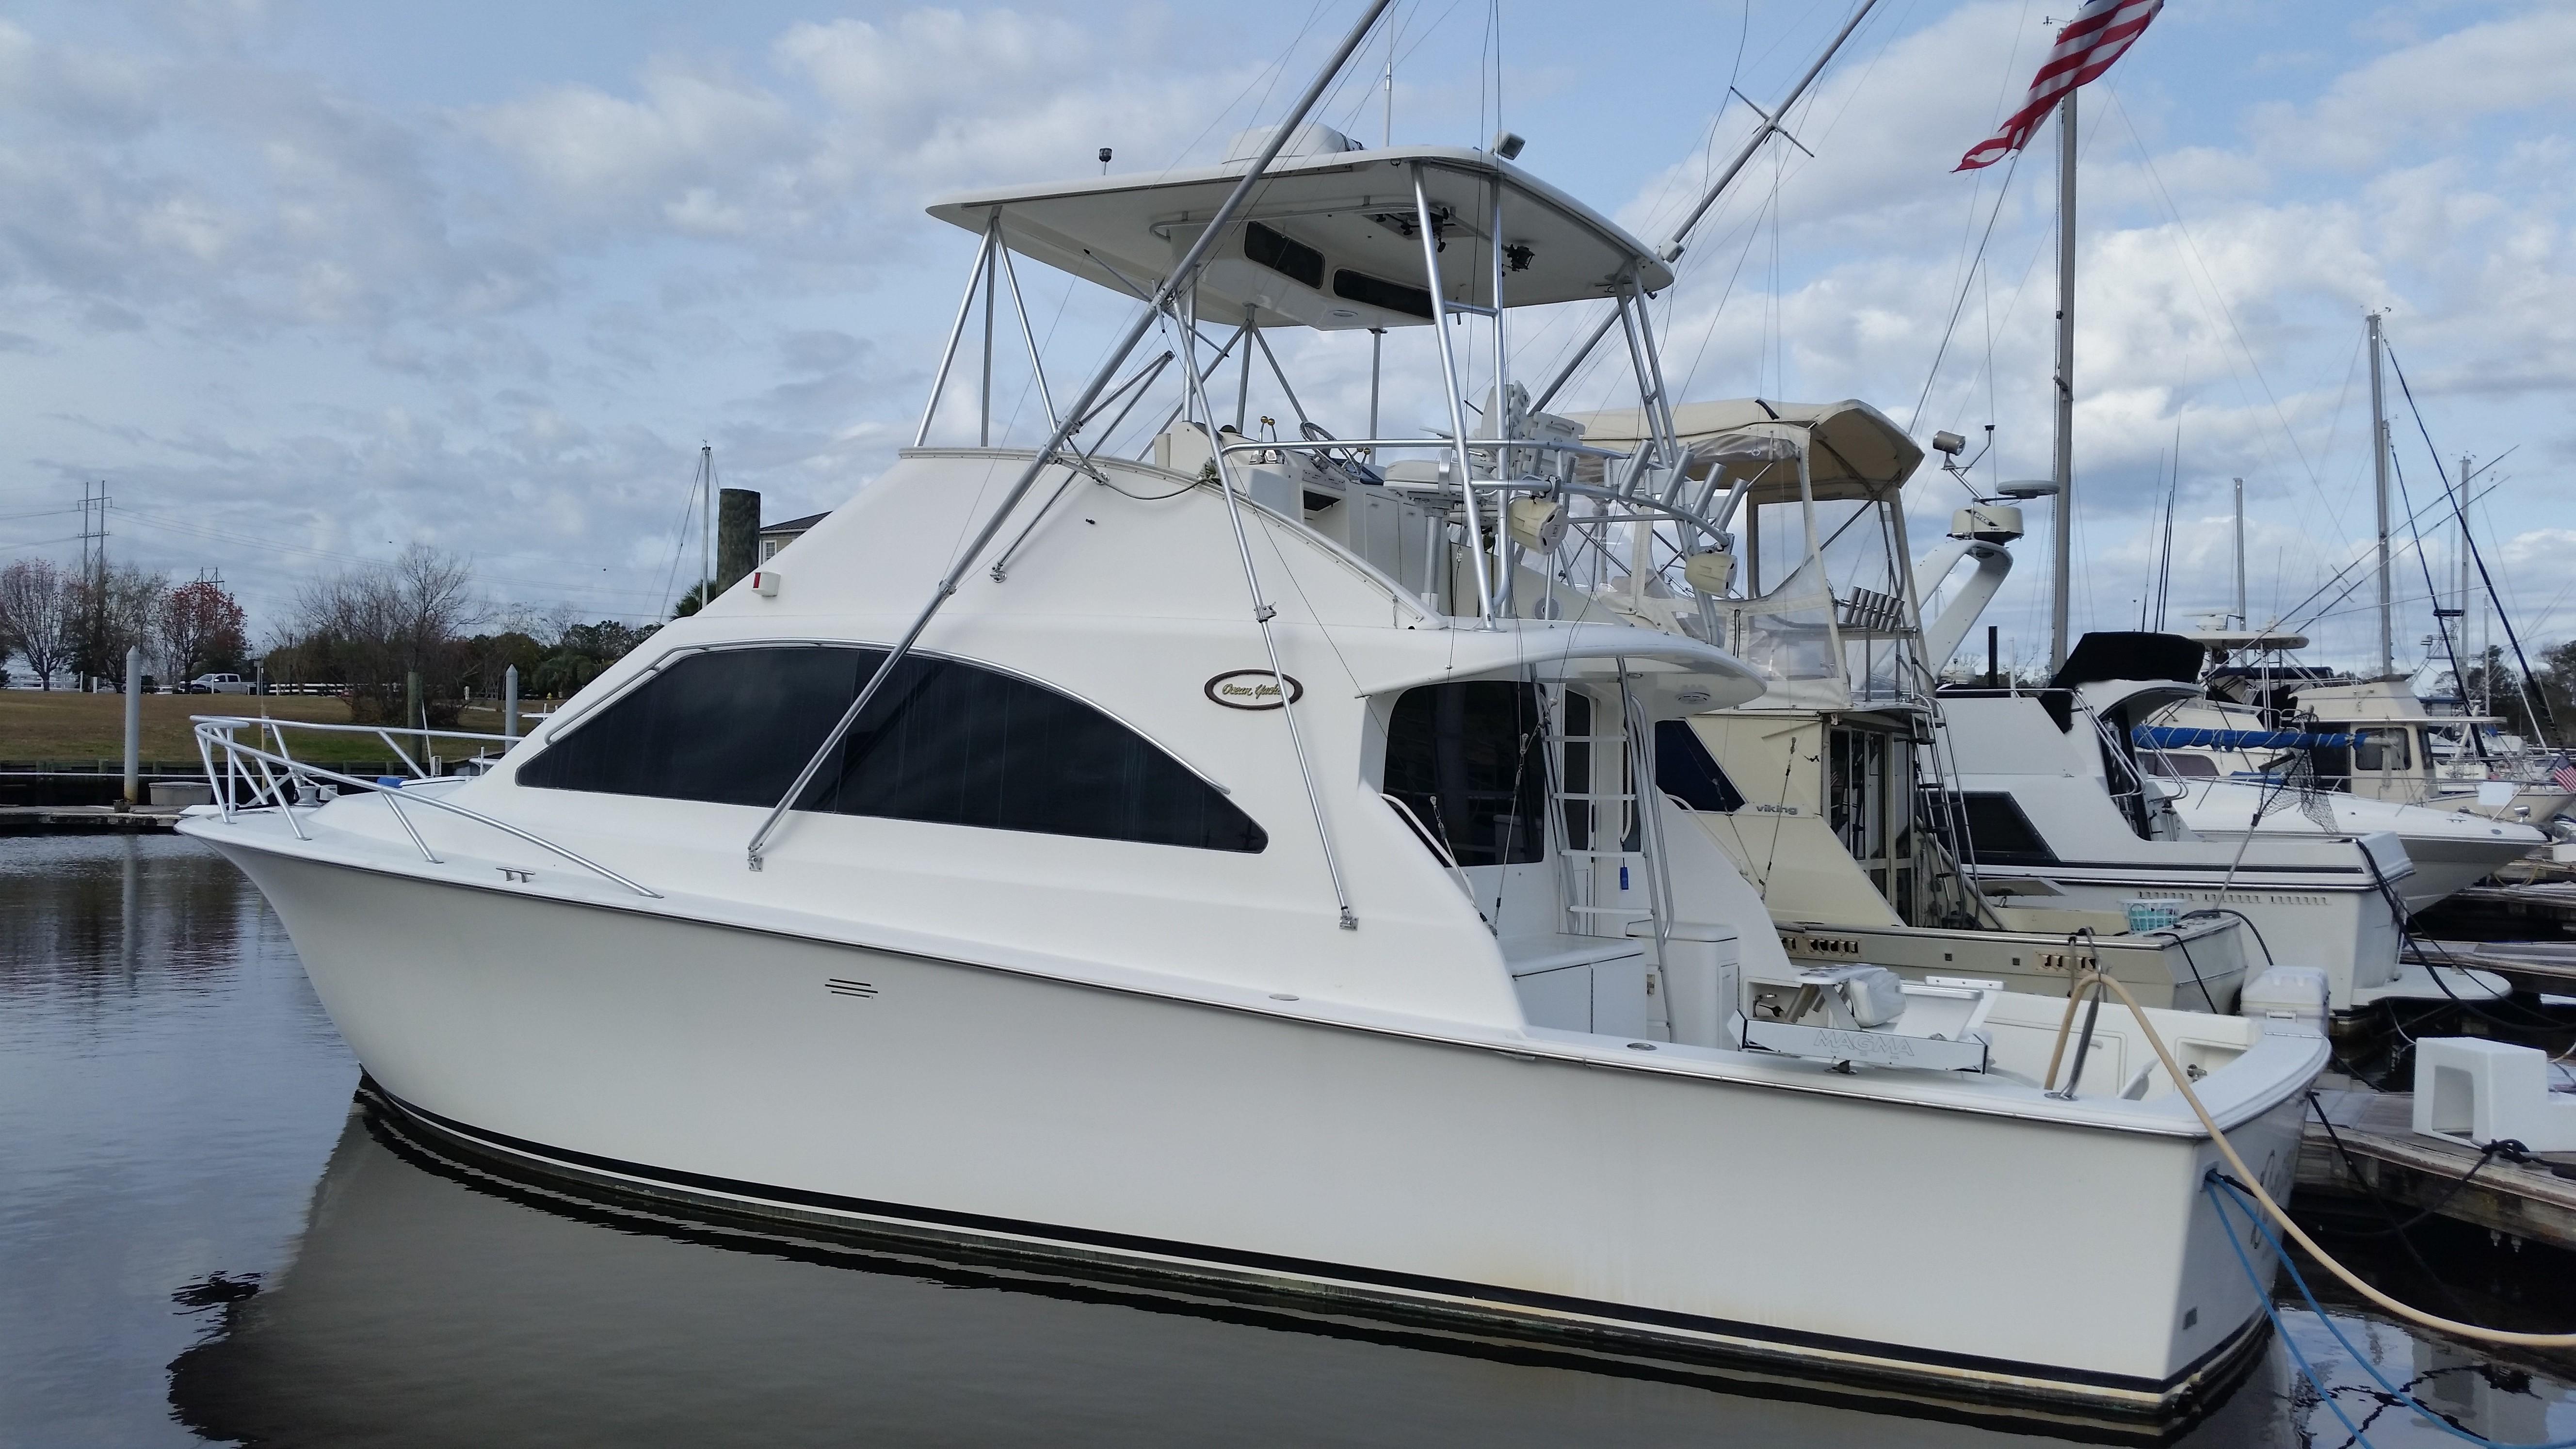 40 foot yacht for sale